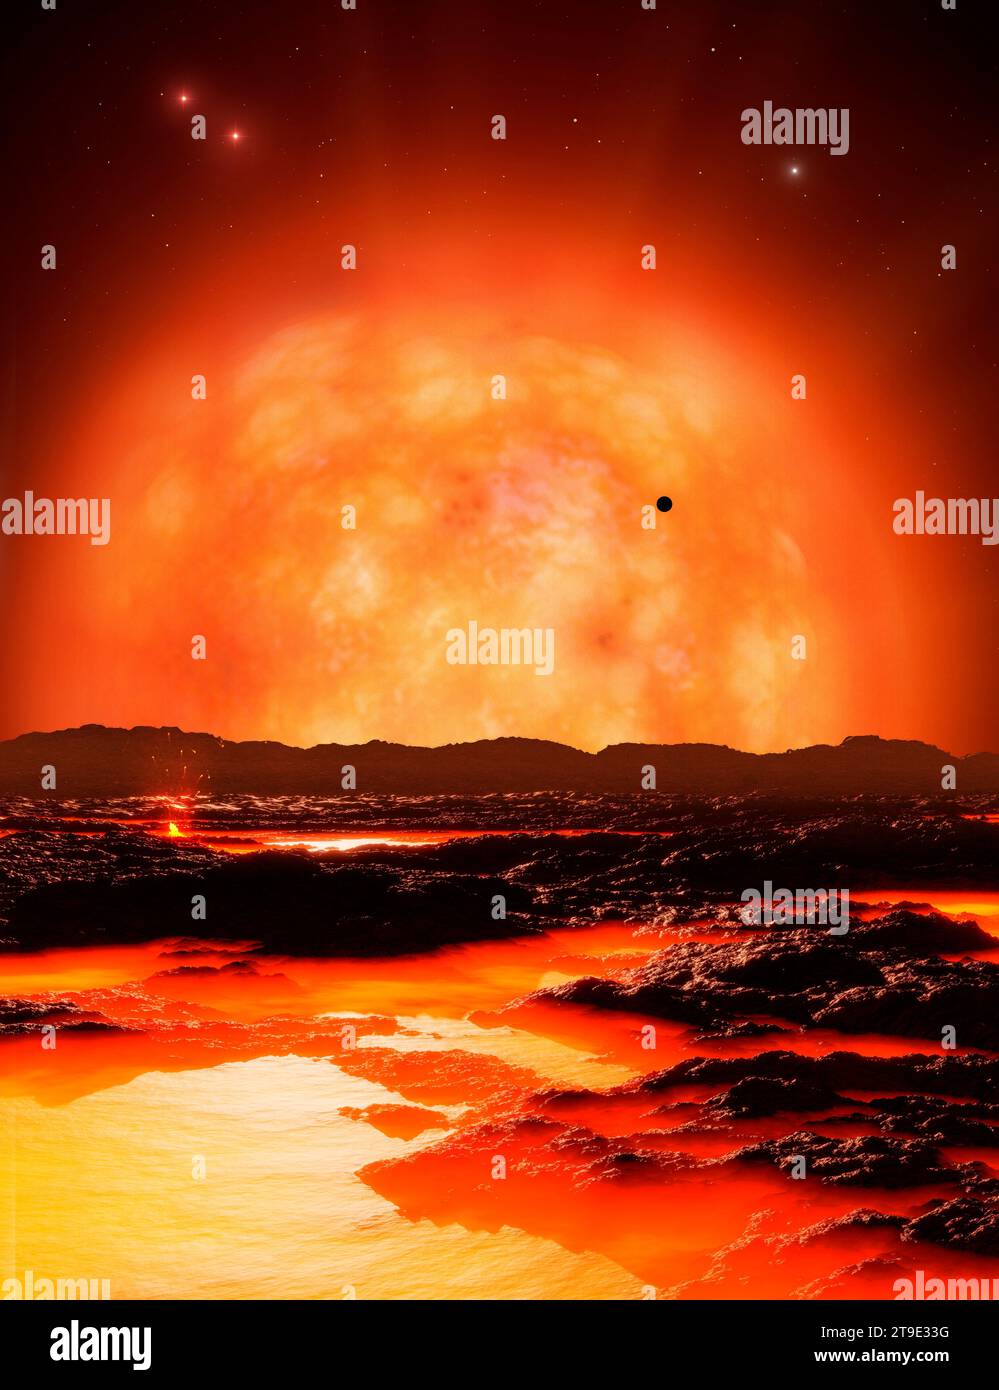 Artwork of Red Giant from Planet Stock Photo